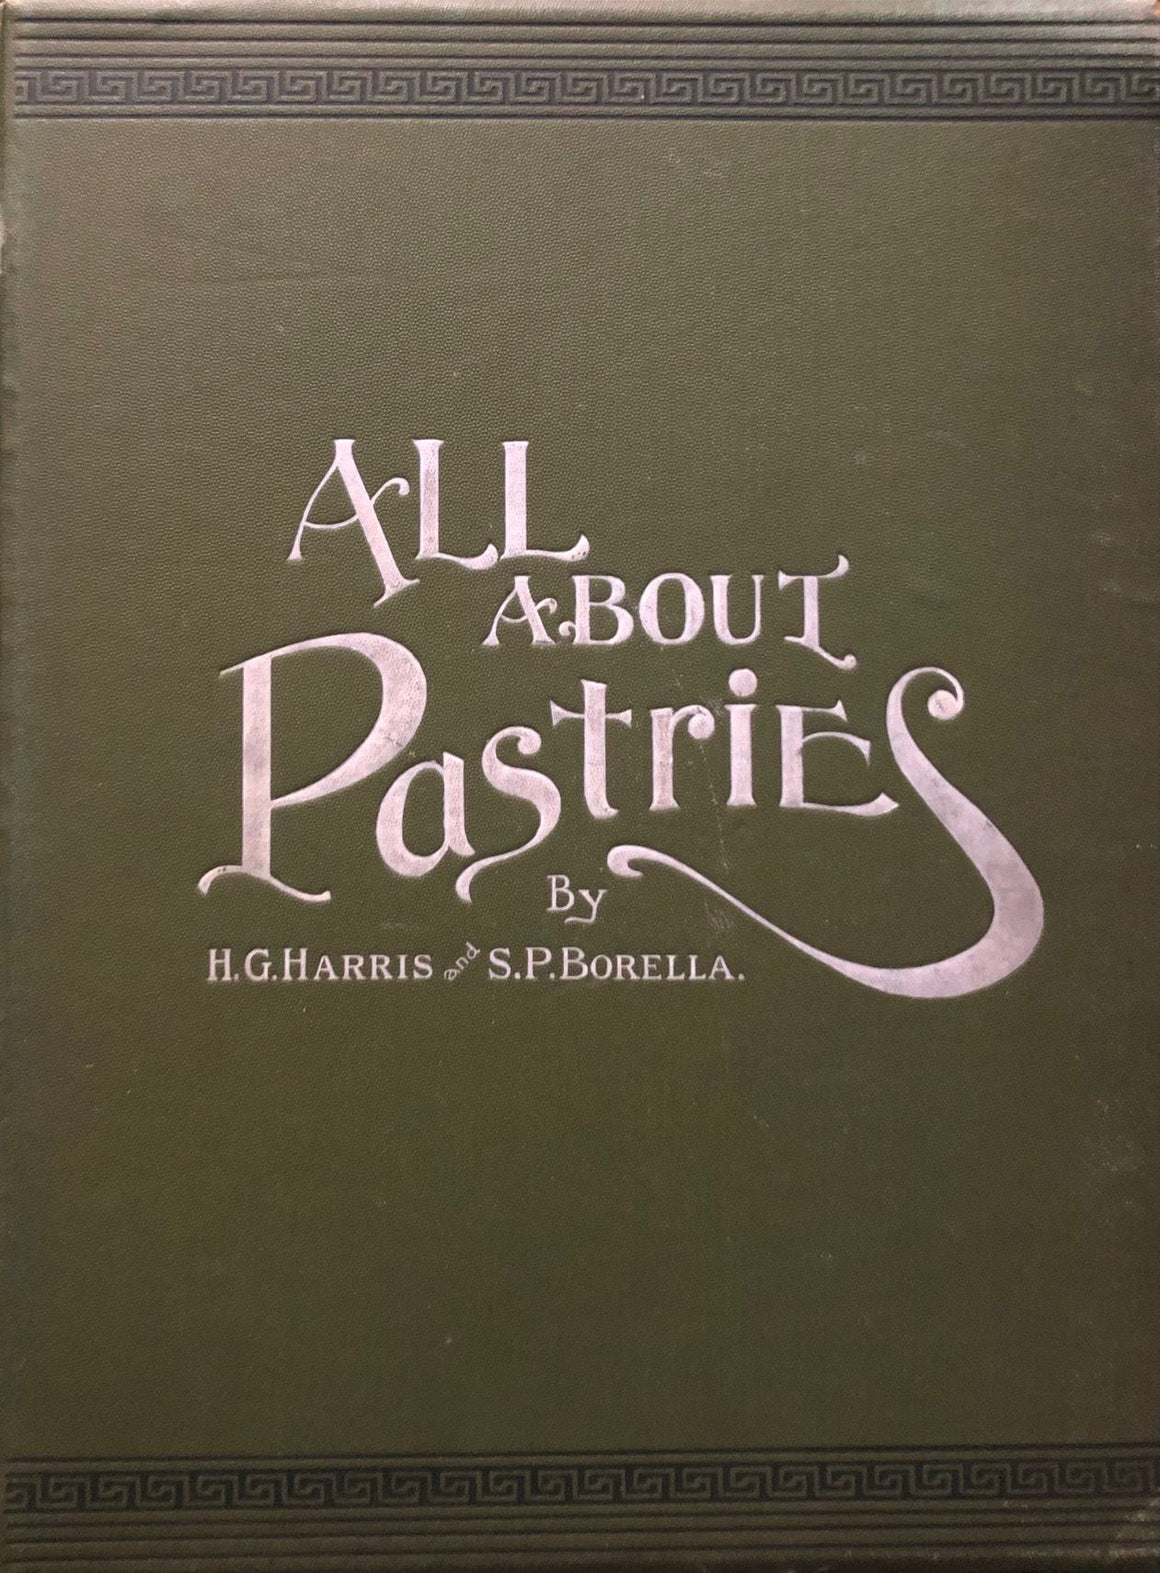 (*NEW ARRIVAL*) (Confectionery) Harris, H.G. & S.P. Borella. All About Pastries